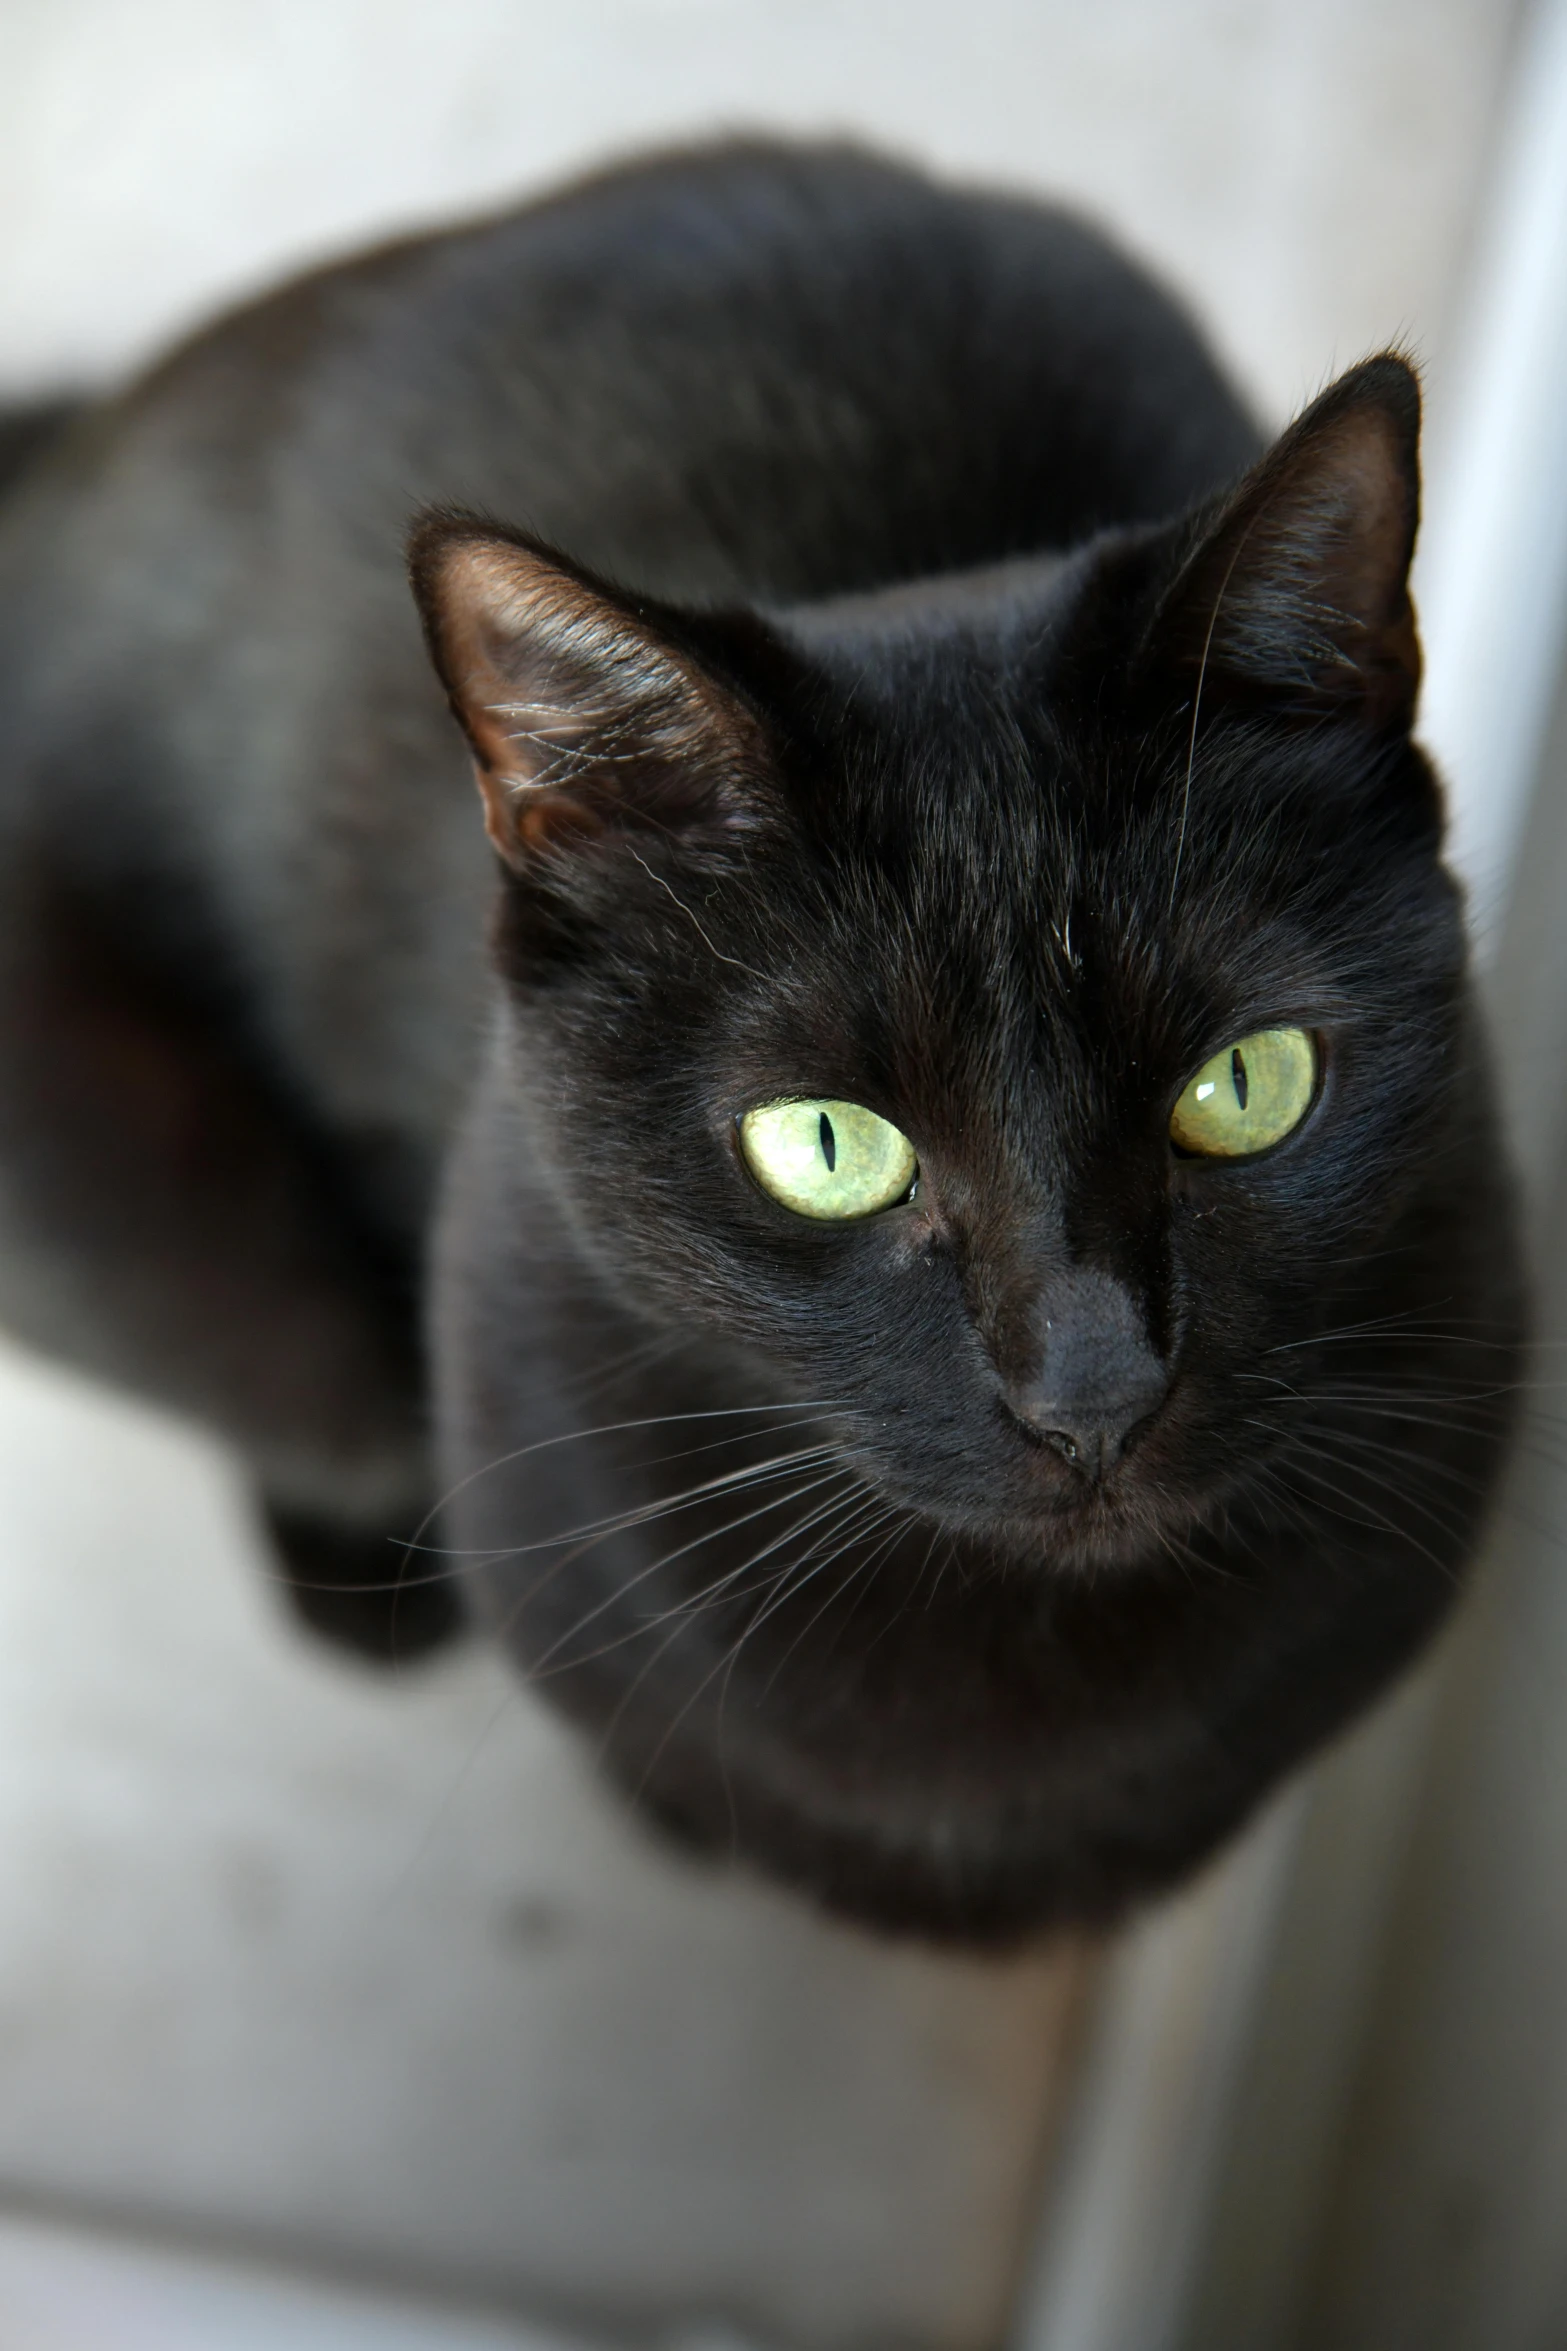 a black cat looking up at the camera, by Winona Nelson, full frame image, black, large green eyes, cat